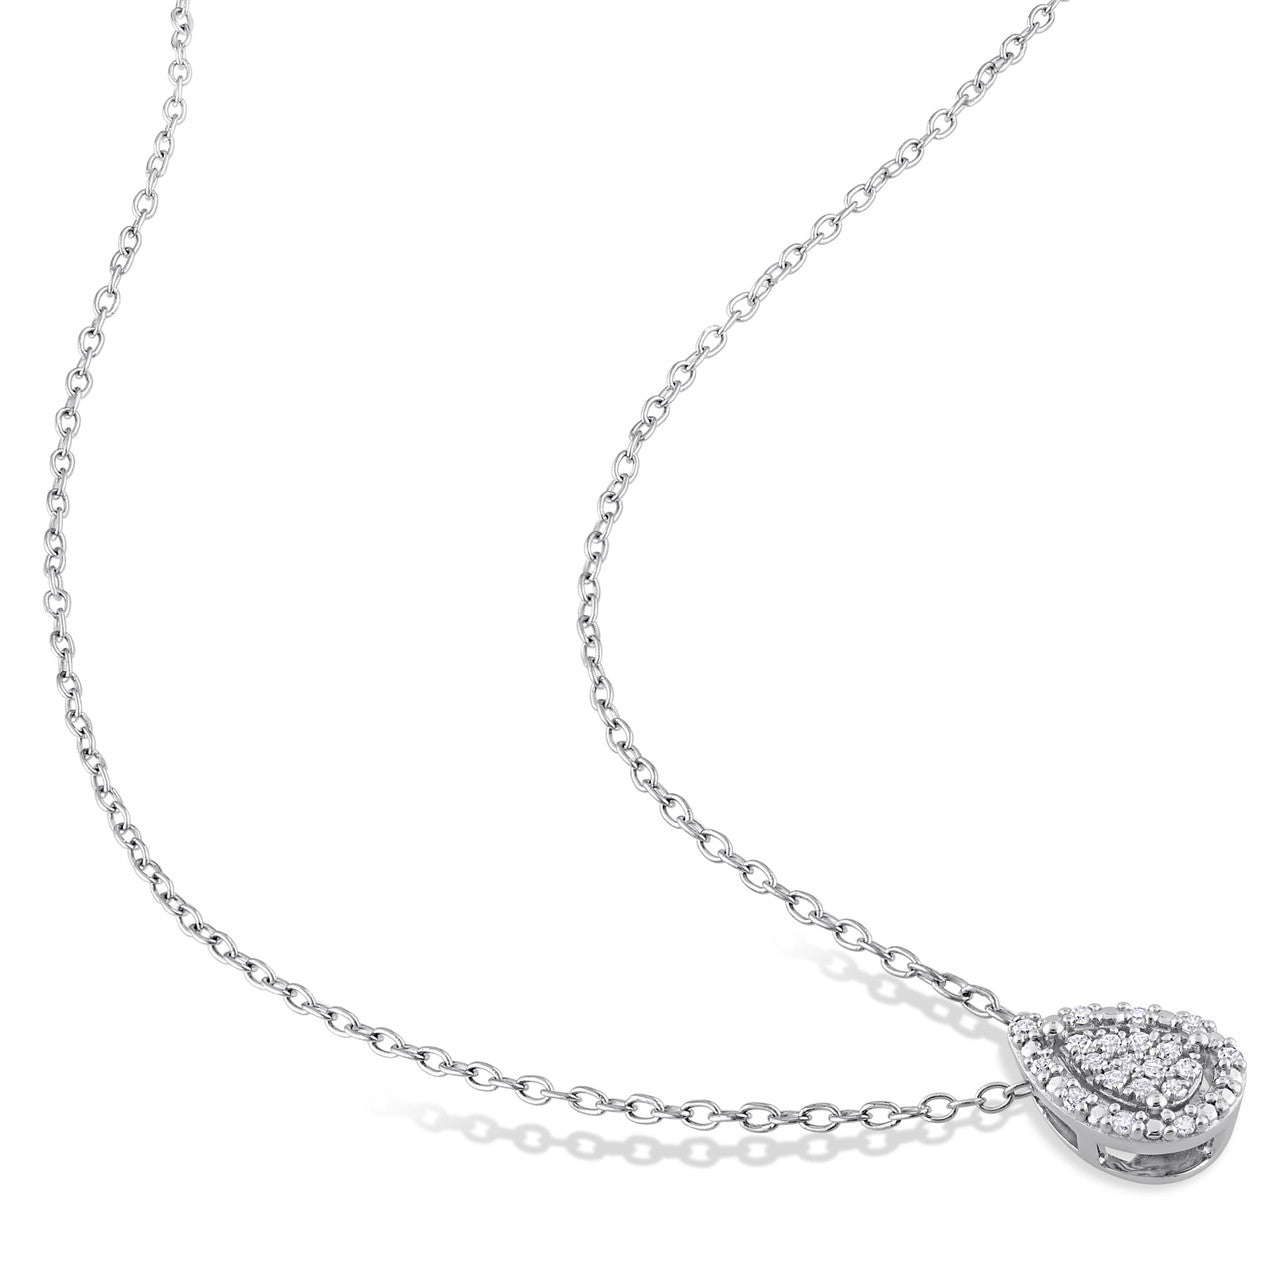 Ice Jewellery 1/10 CT Diamond Cluster Halo Pendant With Chain in Sterling Silver - 75000005783 | Ice Jewellery Australia